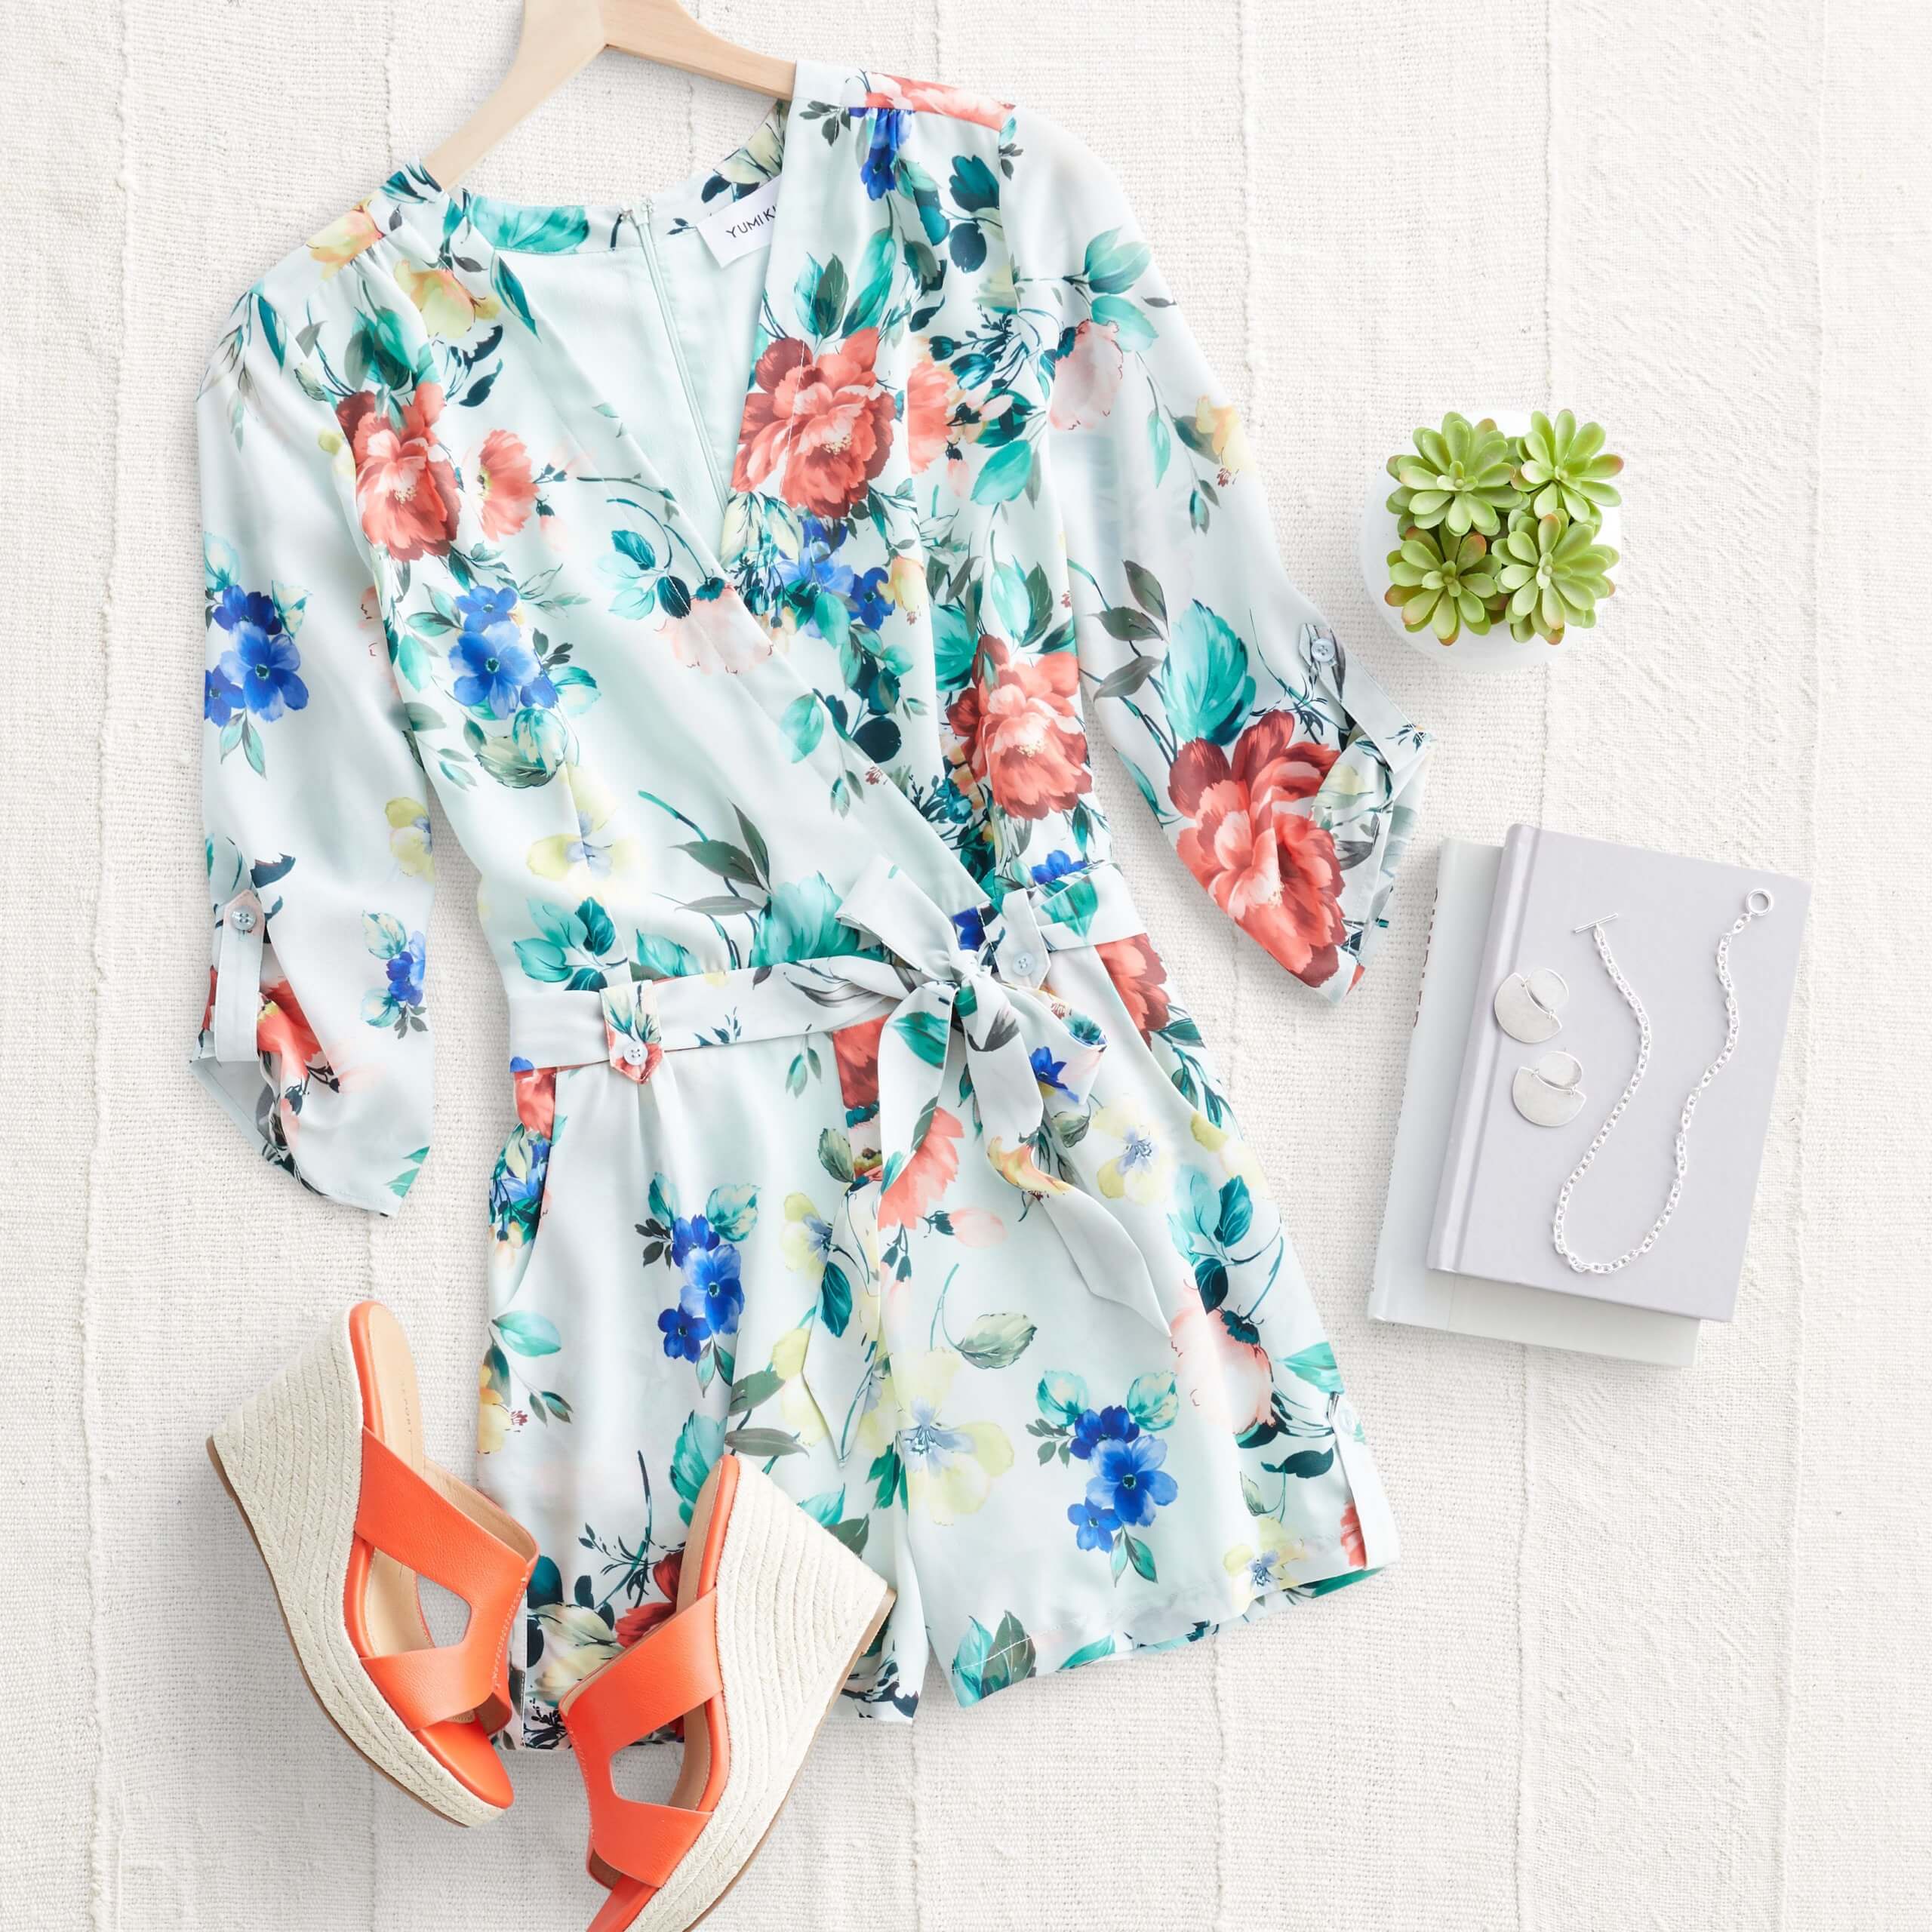 Stitch Fix Women's outfit laydown featuring white floral romper, coral wedges and silver drop earrings and necklace on white book.